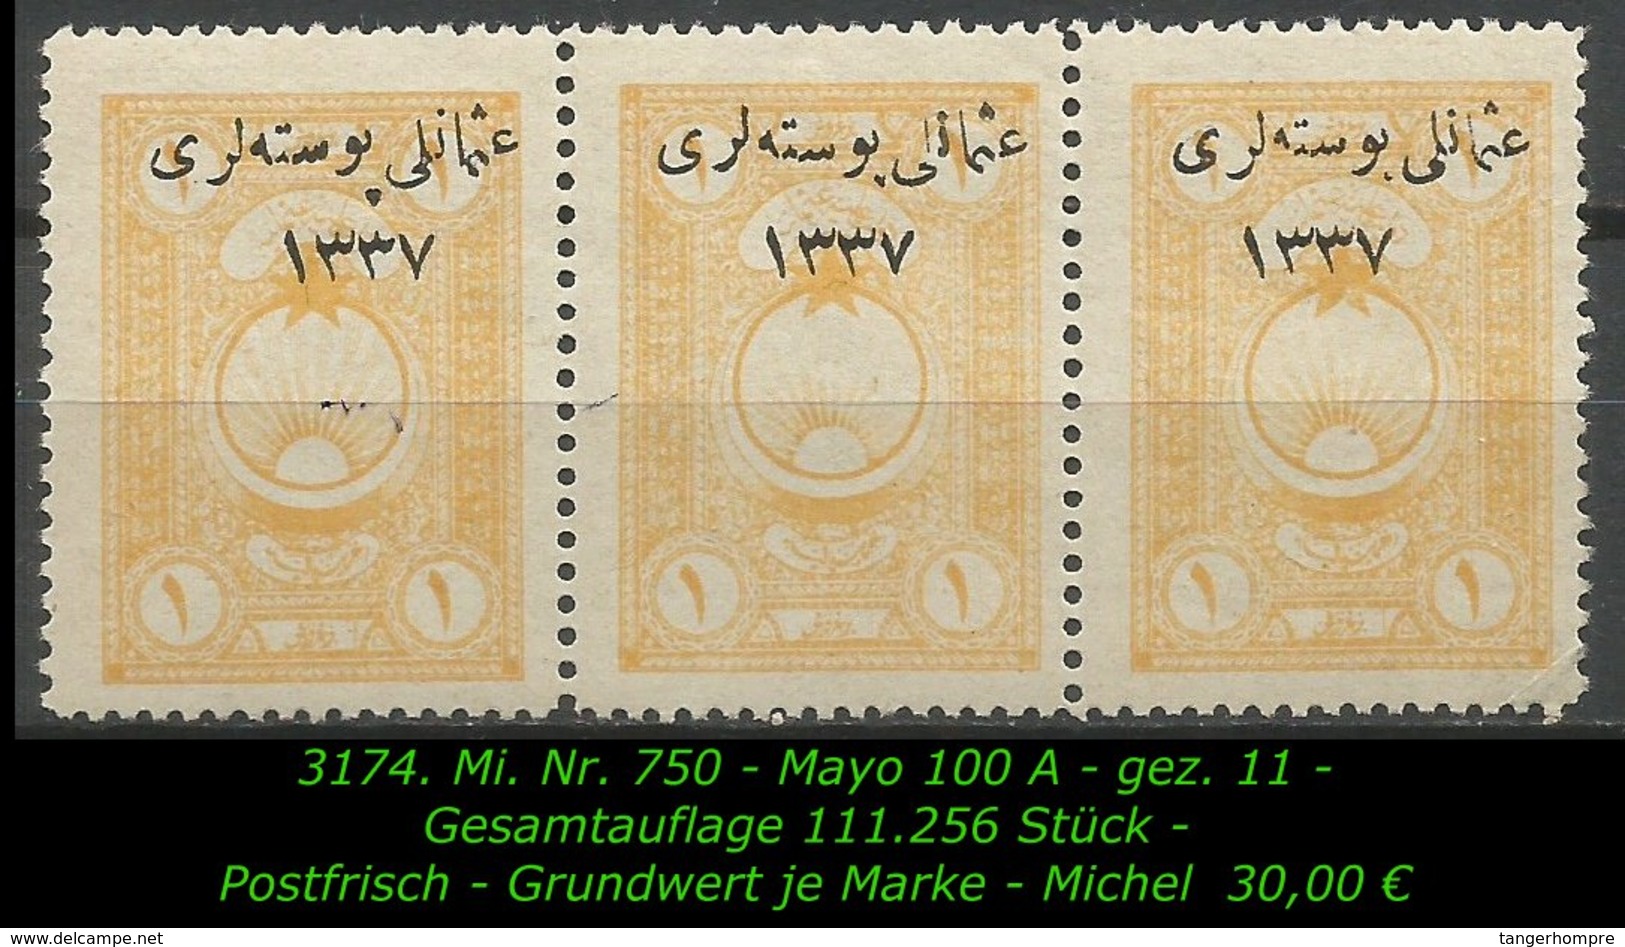 TURKEY ,EARLY OTTOMAN SPECIALIZED FOR SPECIALIST, SEE.. Mi. Nr. 750 - Mayo 100 A - 1920-21 Kleinasien